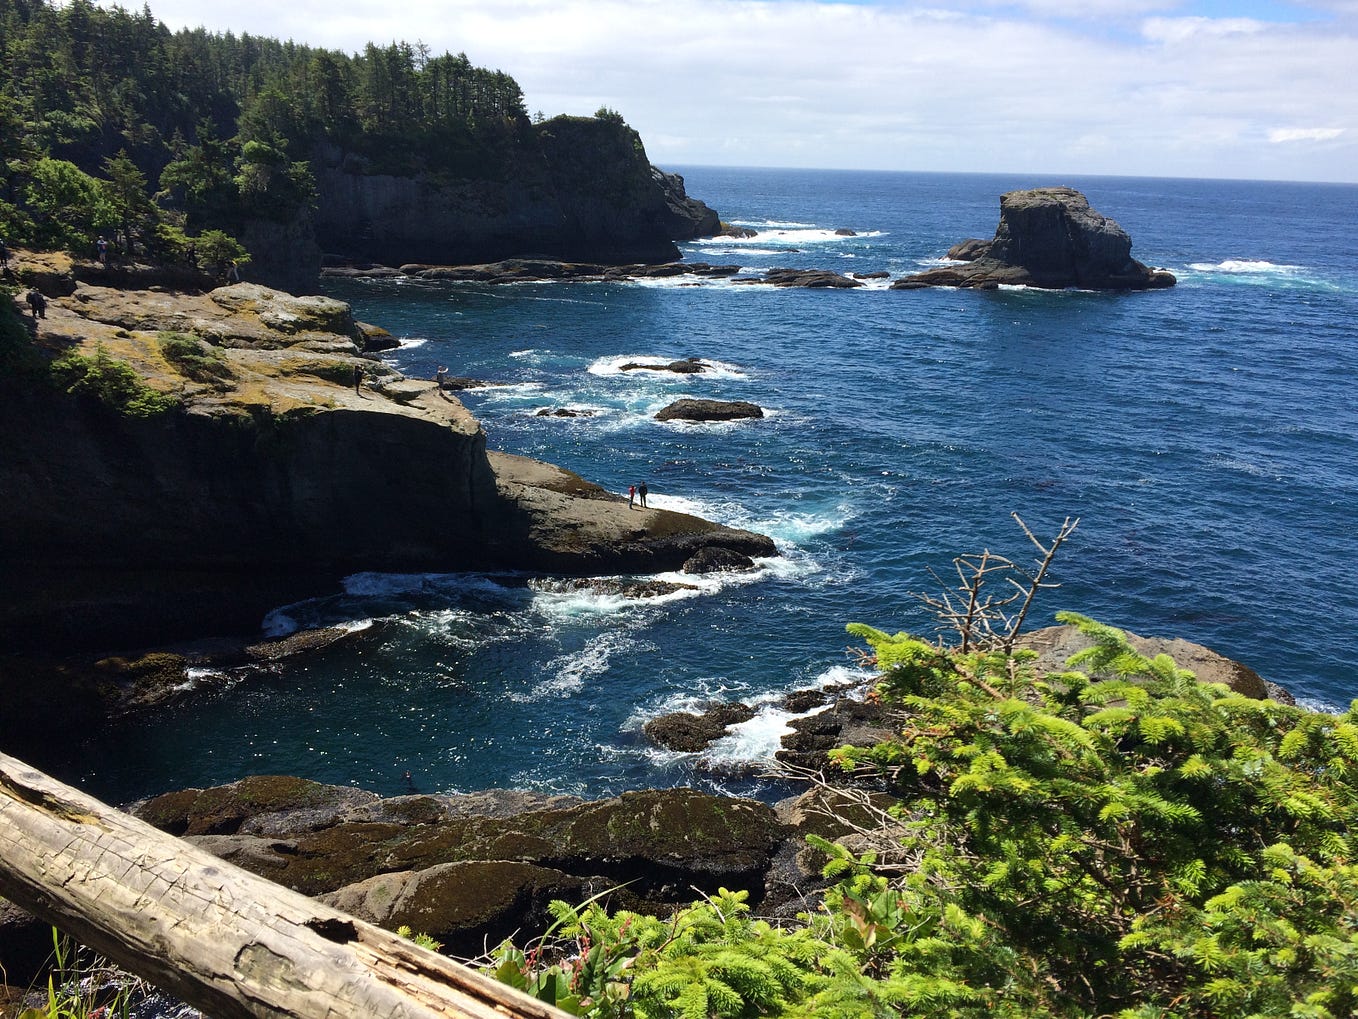 An ocean view over a cliff surrounded by trees in Cape Flattery, Washington